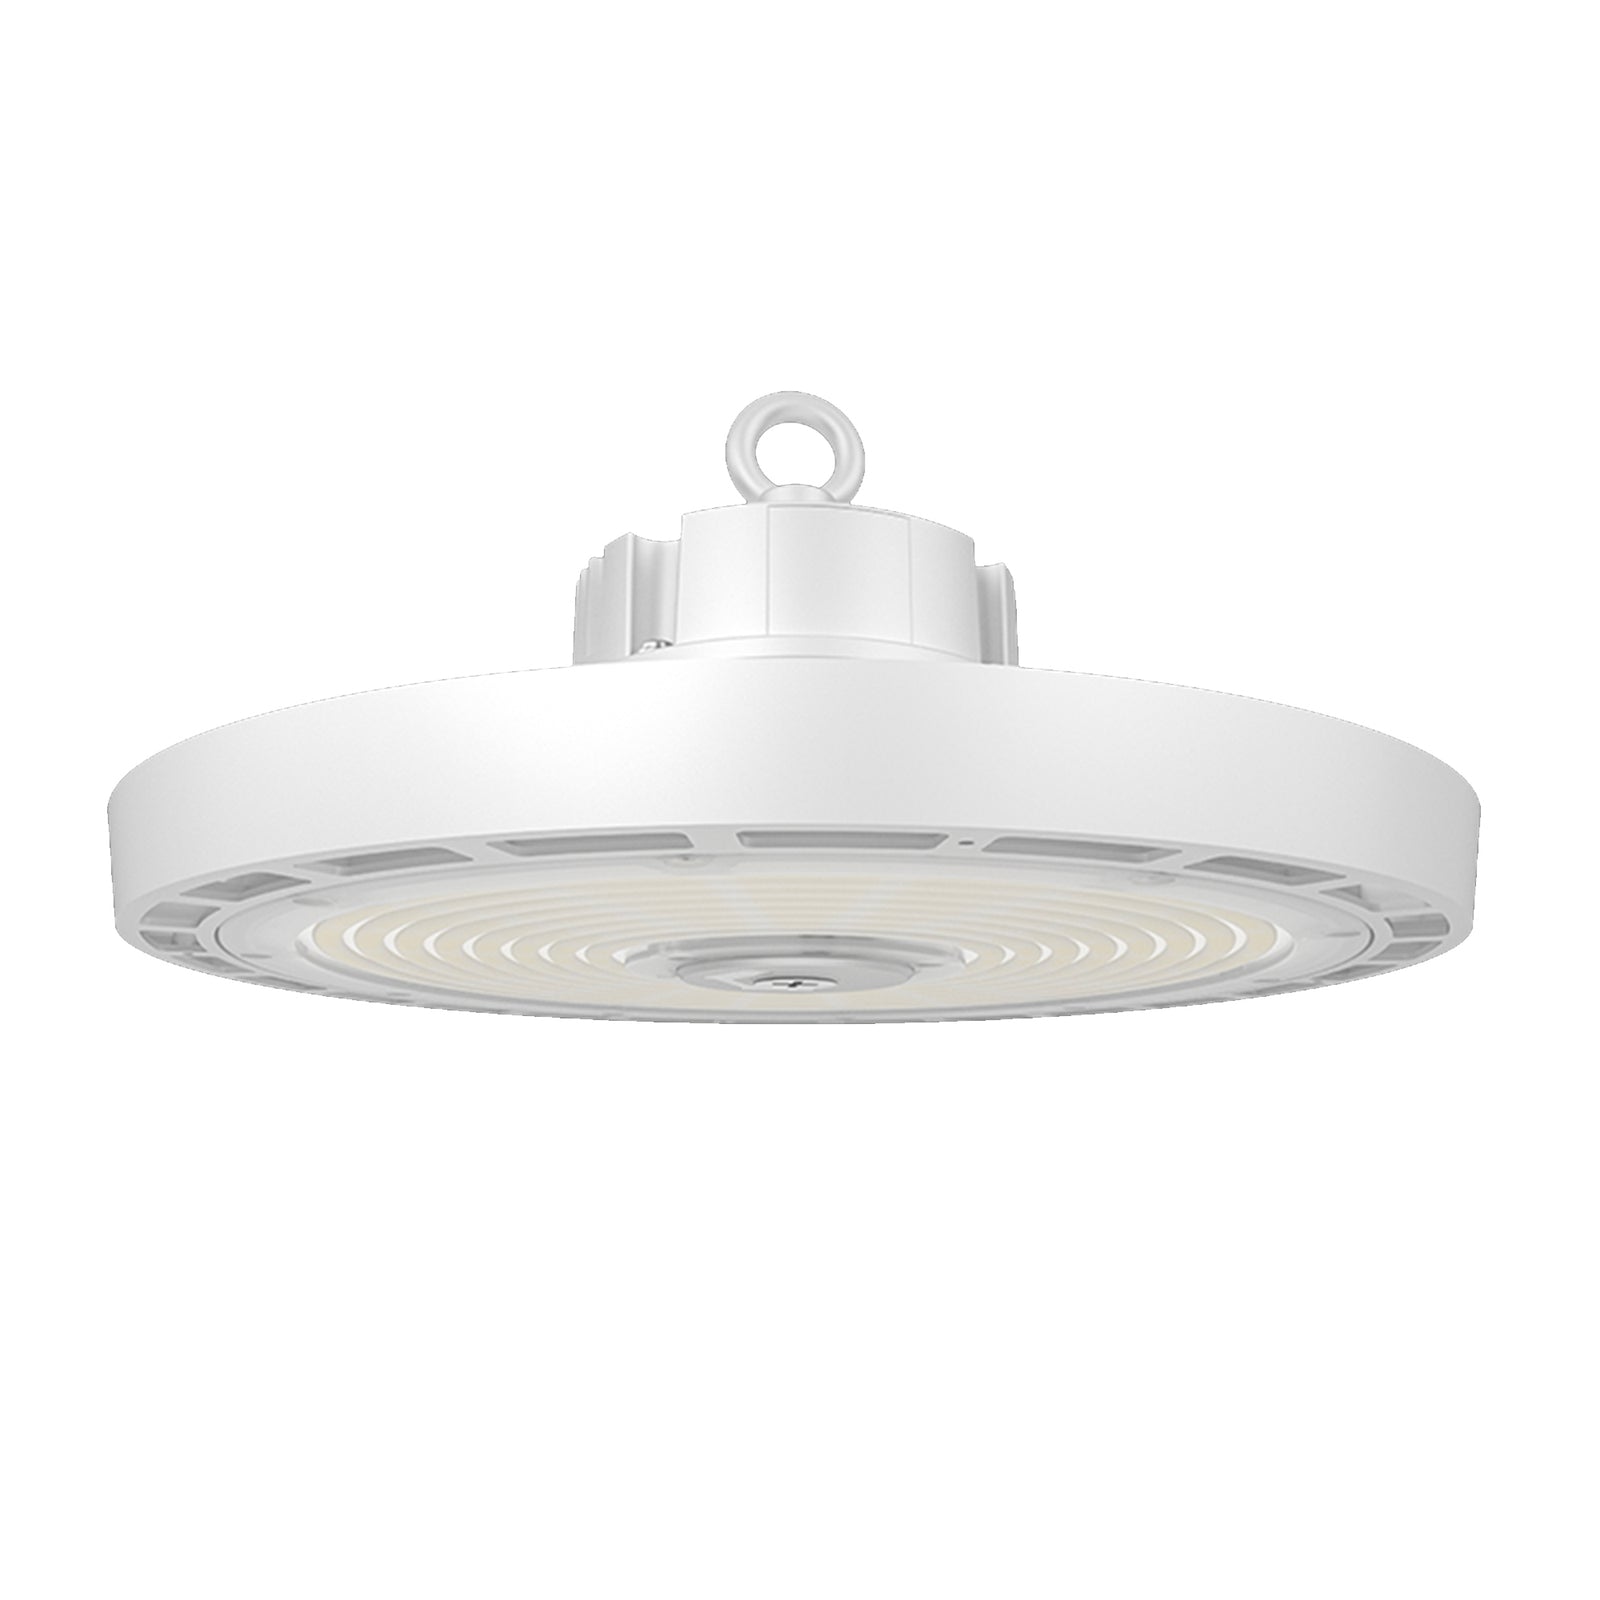 UFO LED High Bay Light - Tunable 80/100/150W, 3000K/4000/5000K, 24000Lm, IP65 Waterproof, 0-10V Dimmable - Ideal for High Ceiling Areas: Warehouses, Workshops, Factories, Garages White